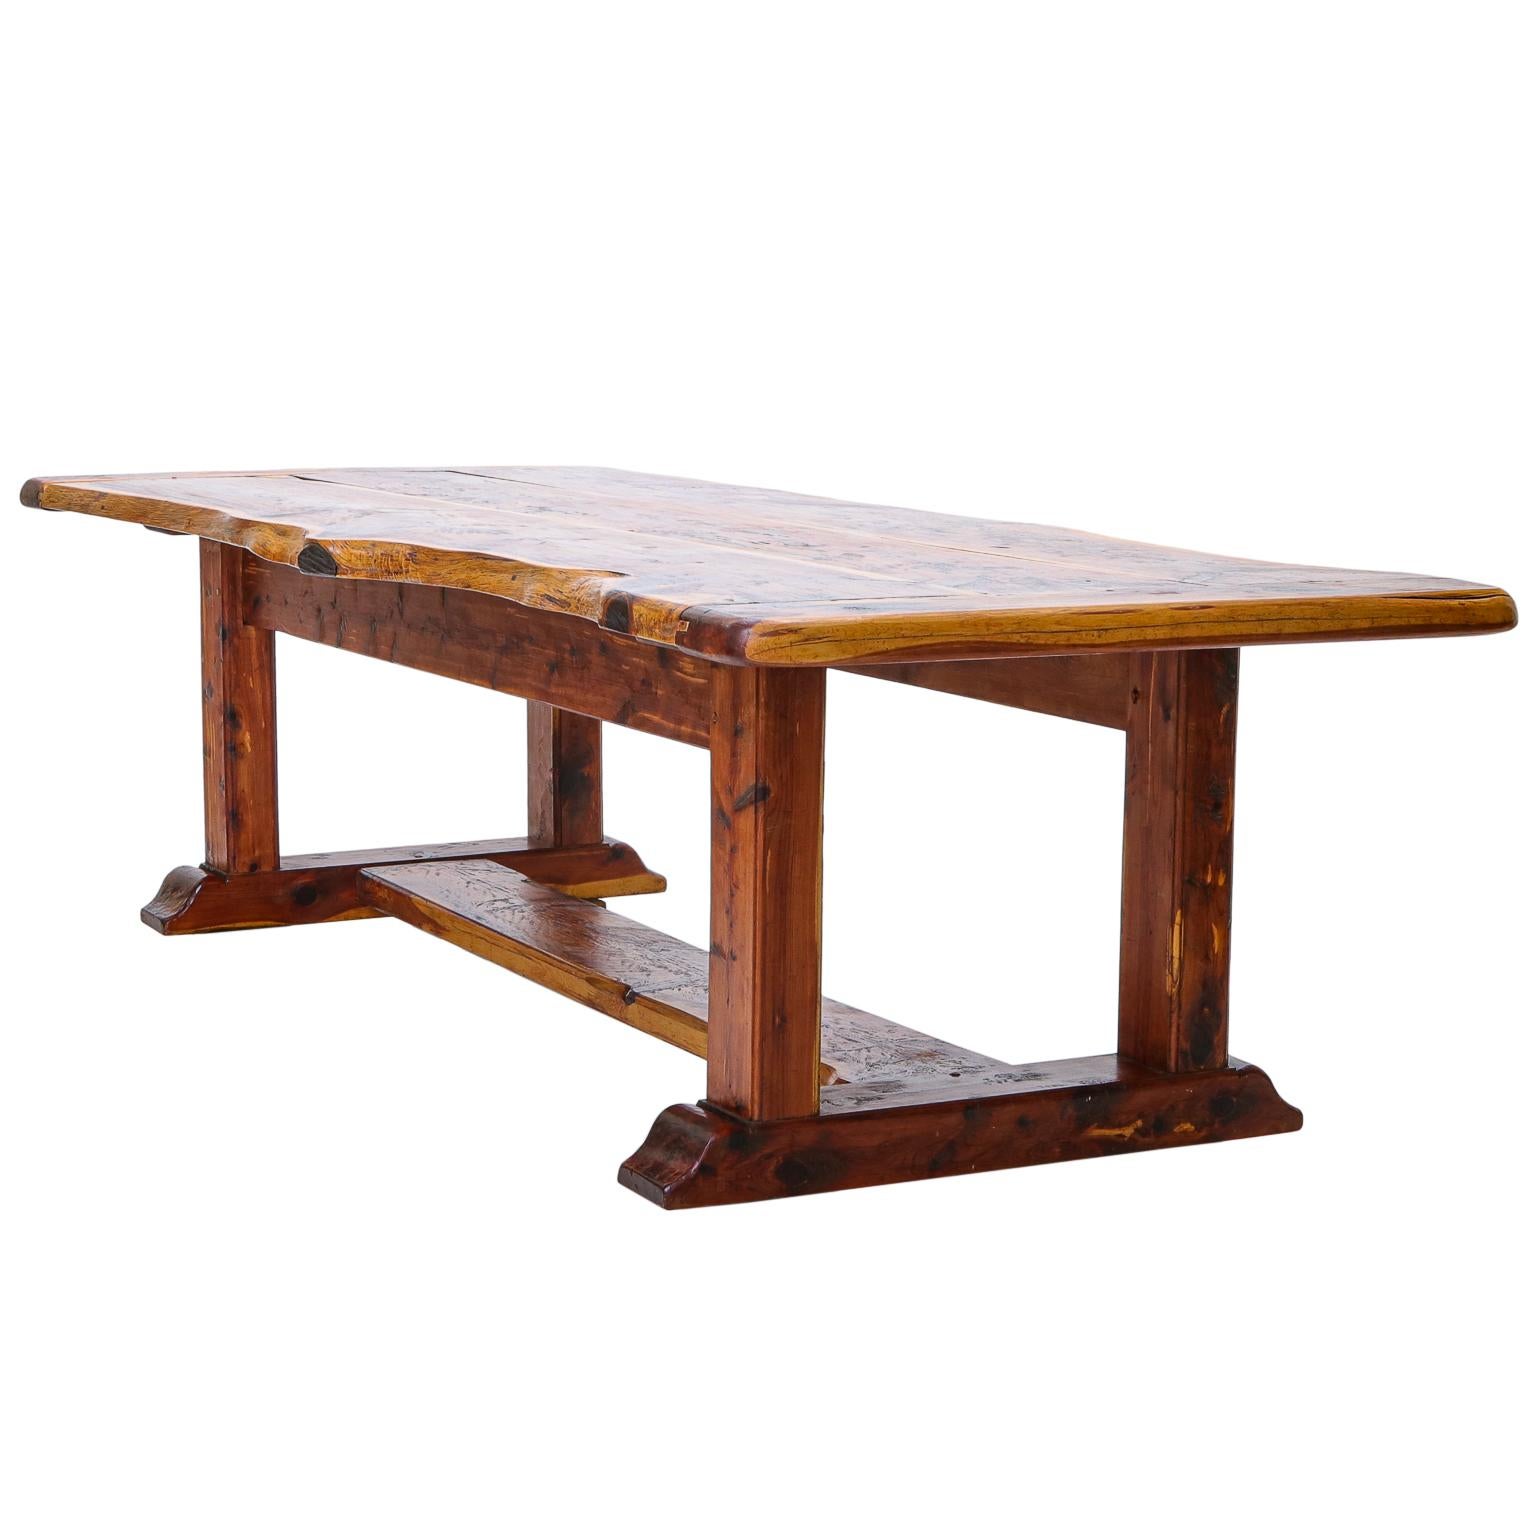 Hand-Crafted Live Edge Cedar Hand-Made Dining Table